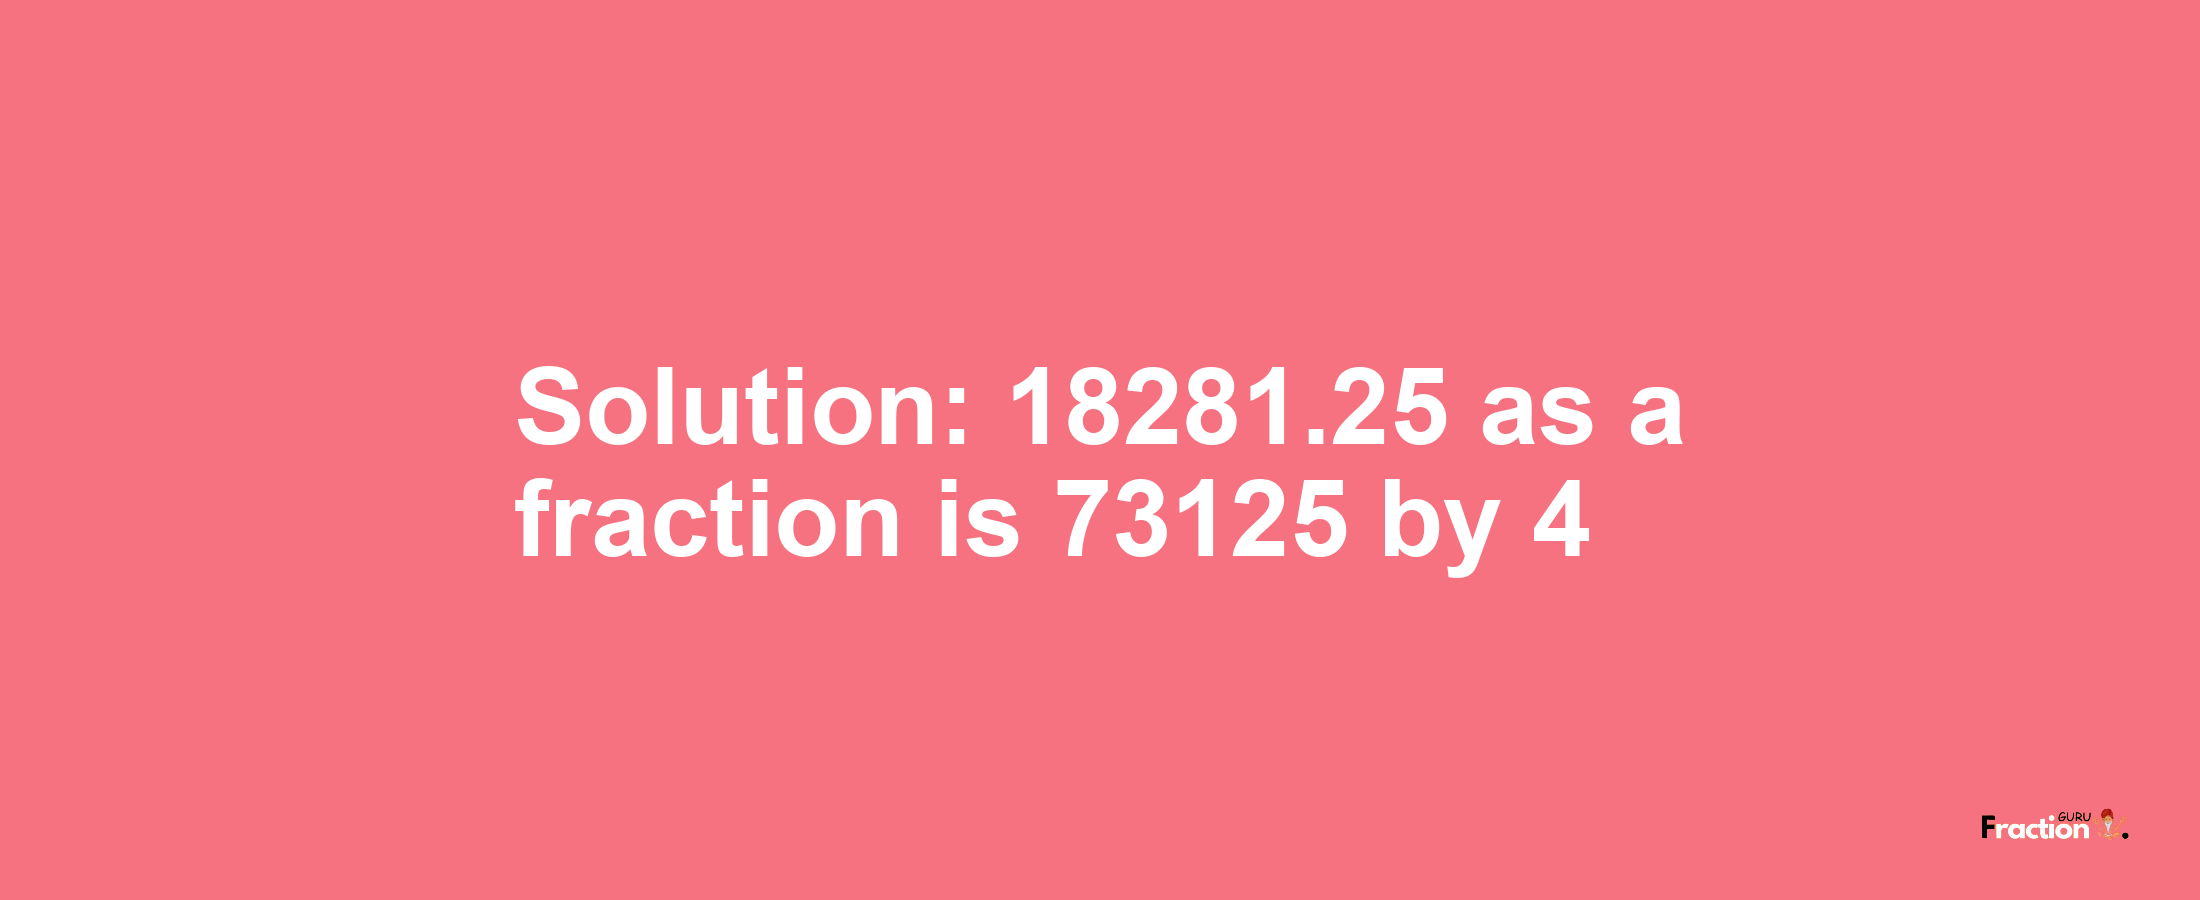 Solution:18281.25 as a fraction is 73125/4